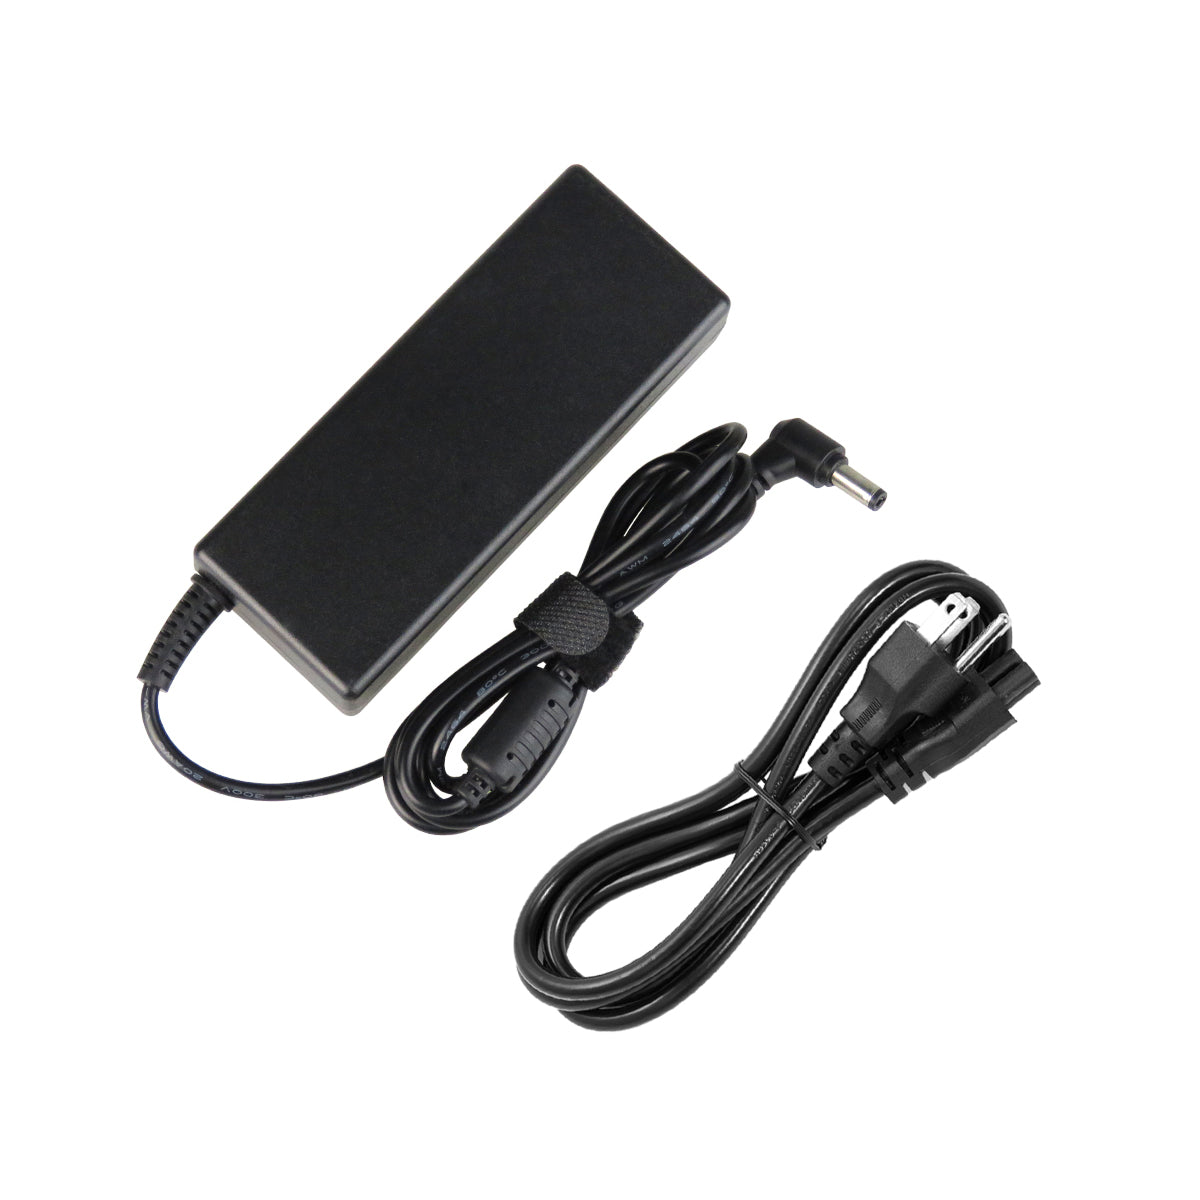 AC Adapter Charger for ASUS N61DA Notebook.